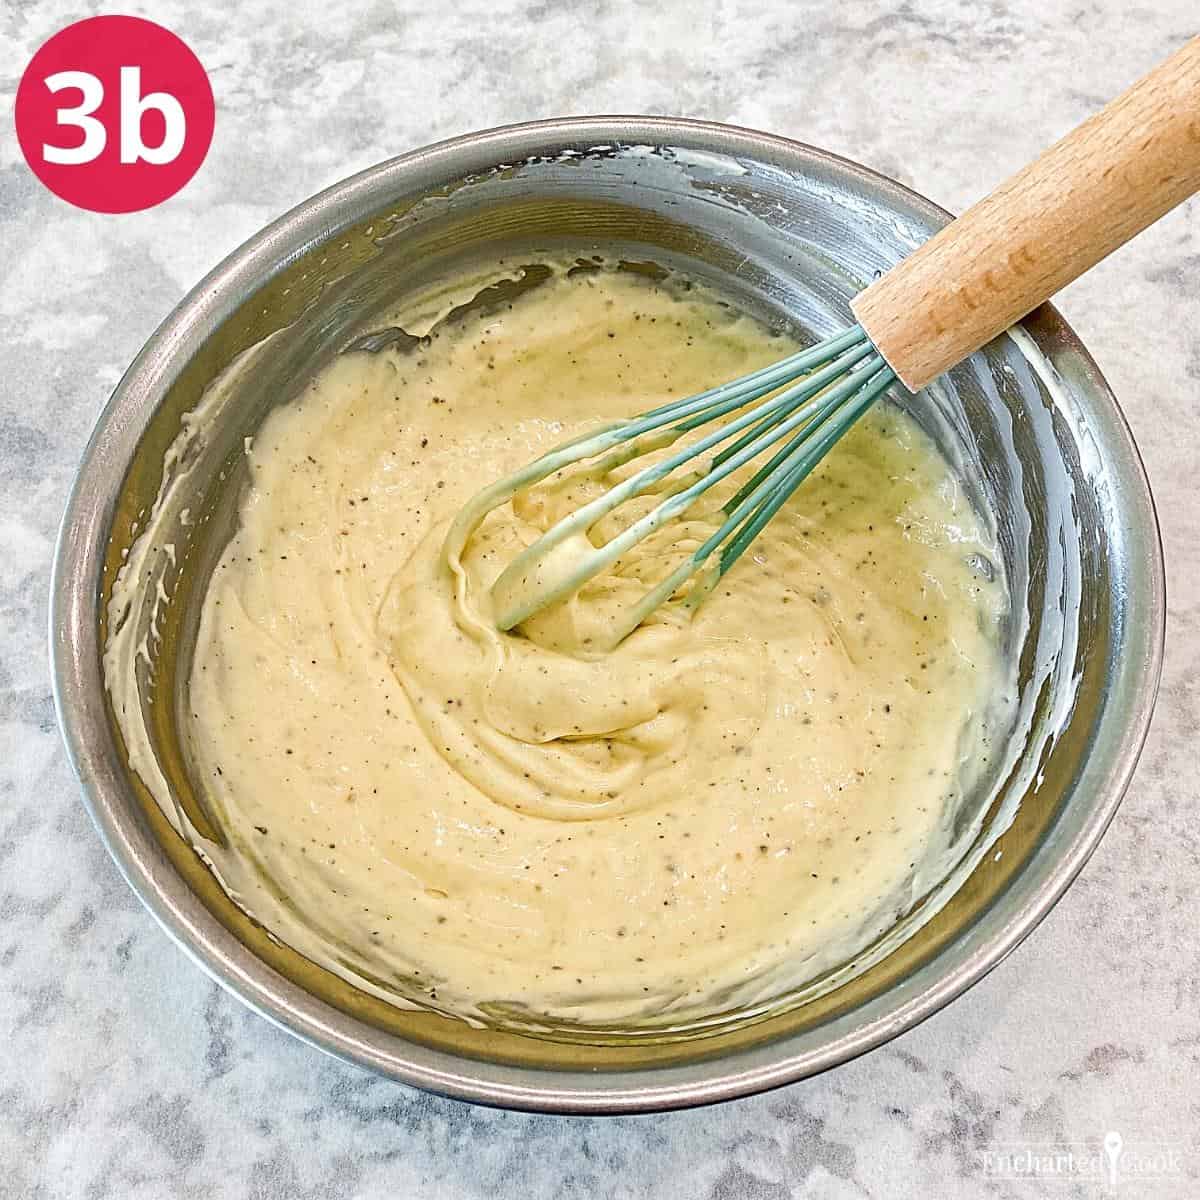 The salad dressing ingredients mixed together in a small bowl with a whisk.